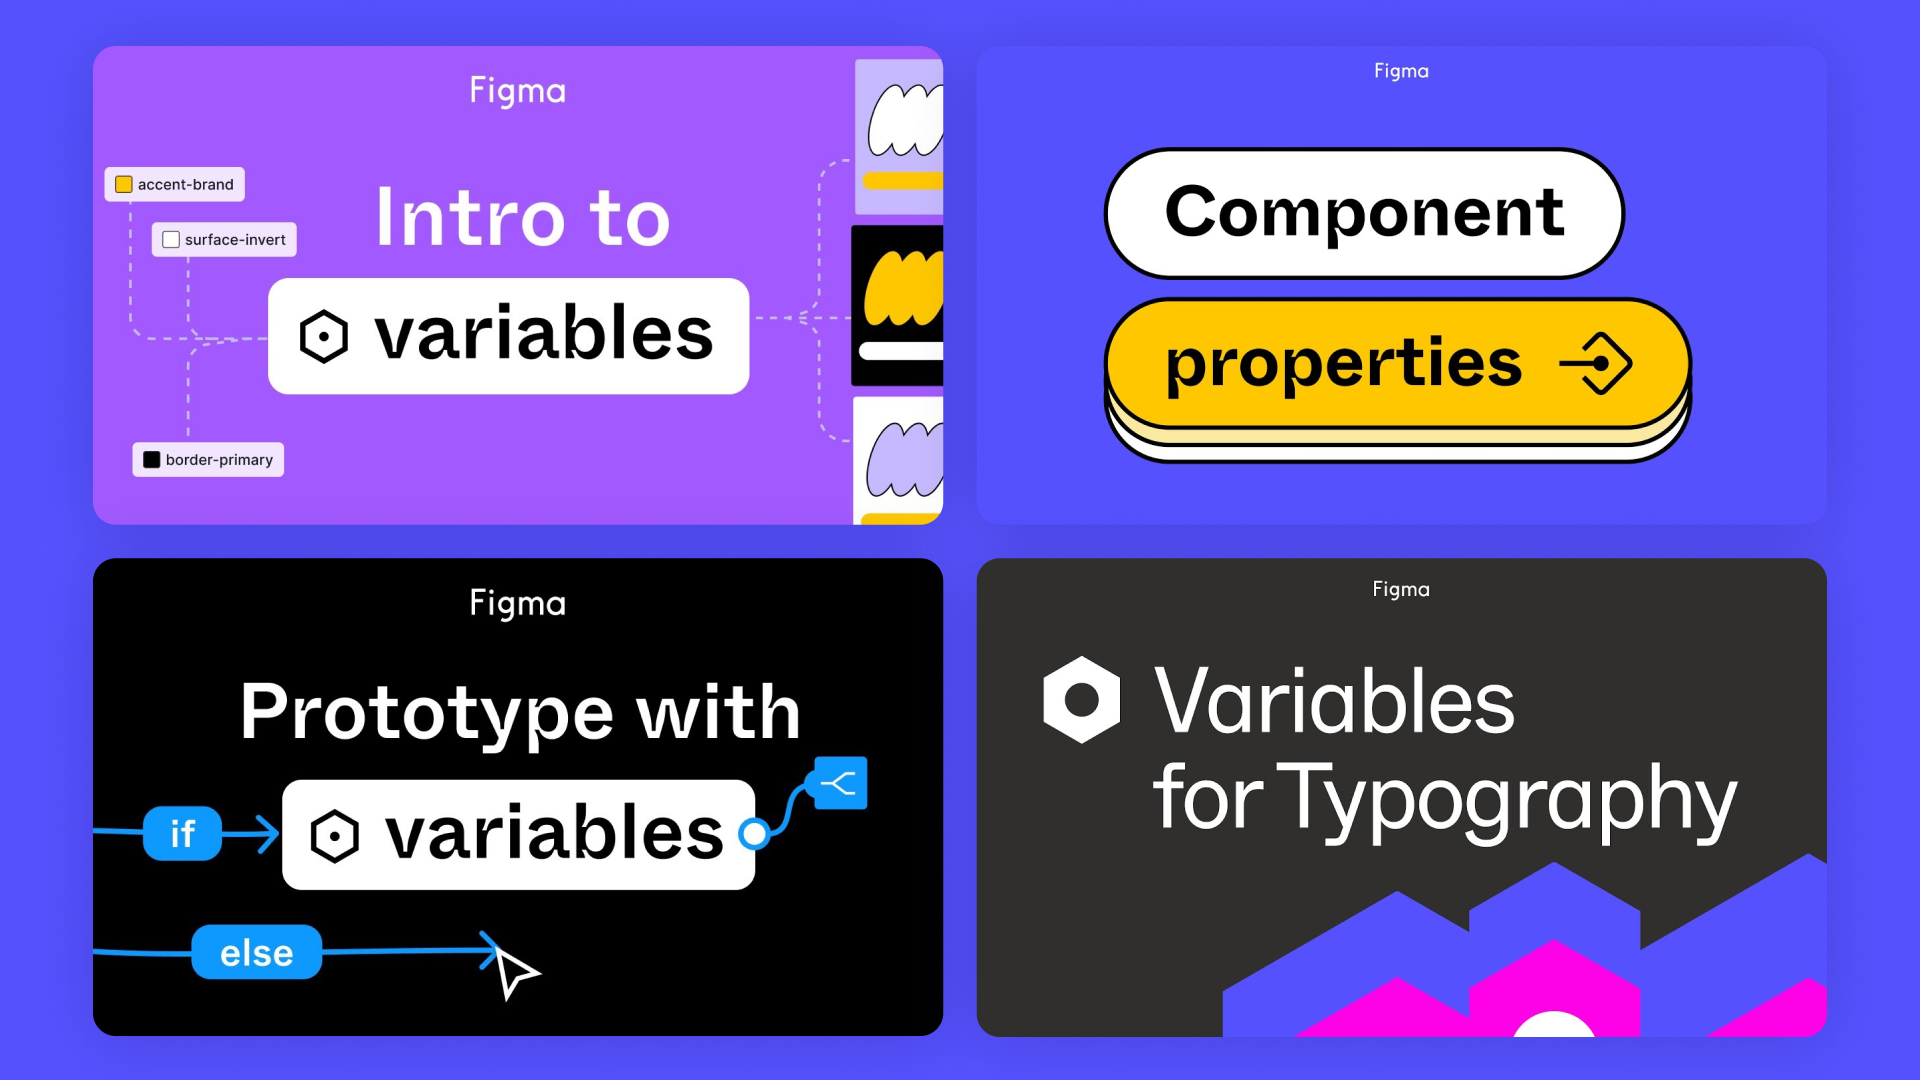 Shown are a few thumbnails from the Figma Product Education's YouTube channel